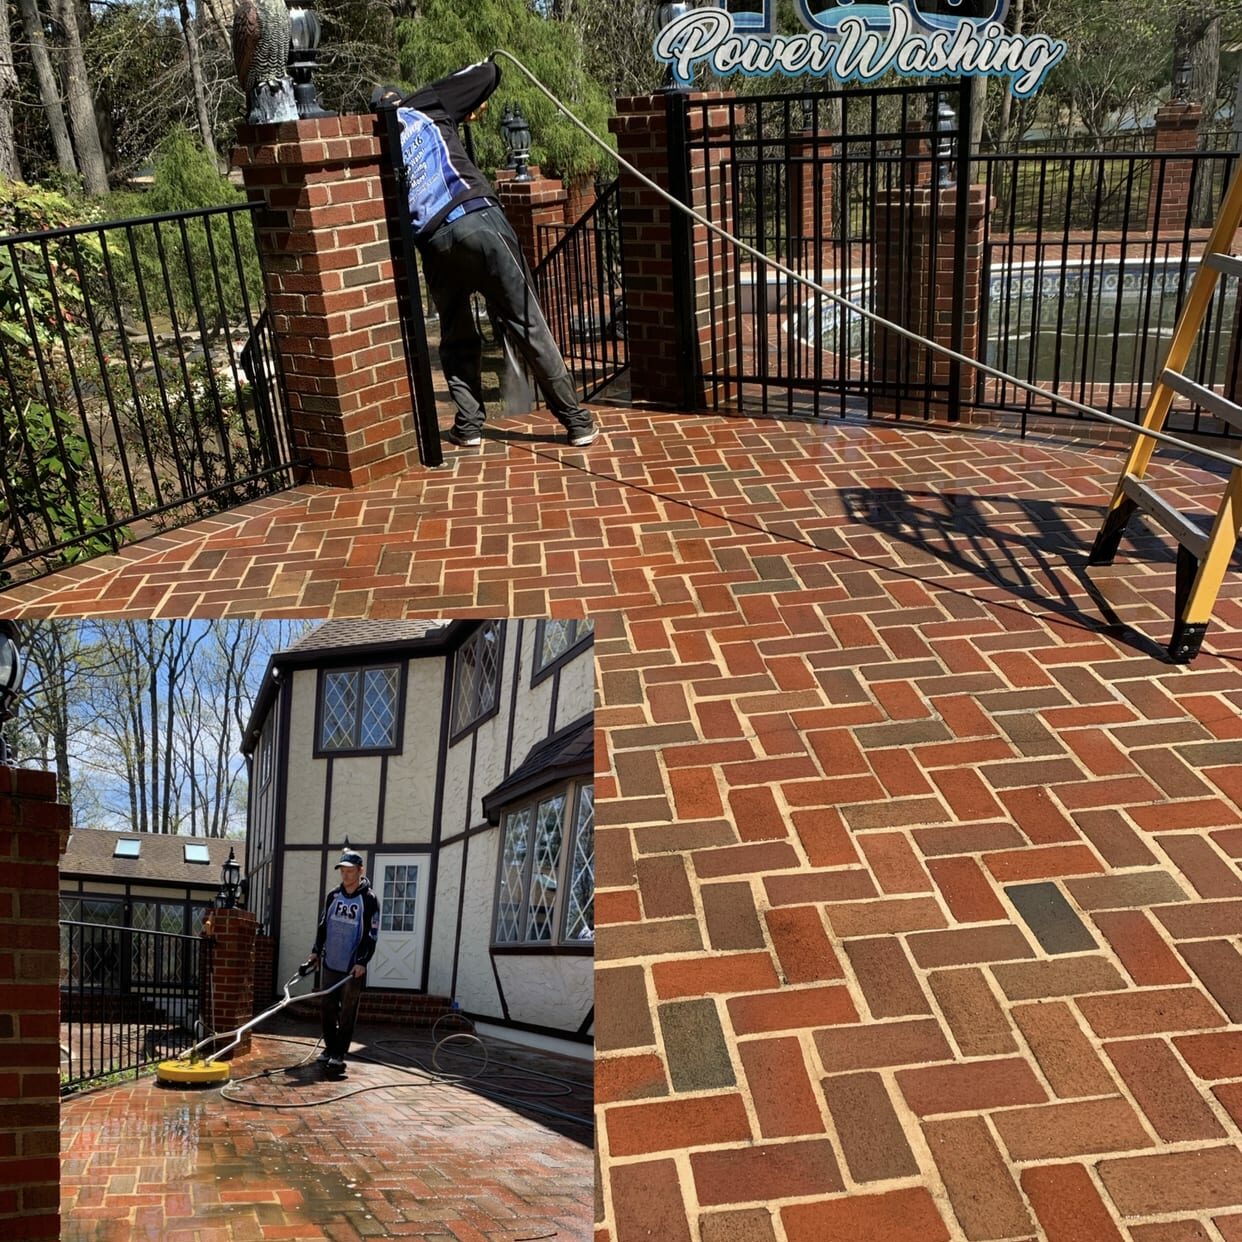 At F&S Power Washing, we don’t take a one-size-fits-all approach to paver cleaning. We like to make custom plans for each project.
After all, the right way to clean pavers depends on things like how dirty the surface is and what material the pavers are made of.
When we evaluate your paver cleaning needs, we can determine the right amount of pressure to remove dirt, mold, and fungi. We don’t want to use too much water pressure because it could damage your pavers. We aim to get the perfect level to revitalize your pavers, making them as attractive as the day they were installed.